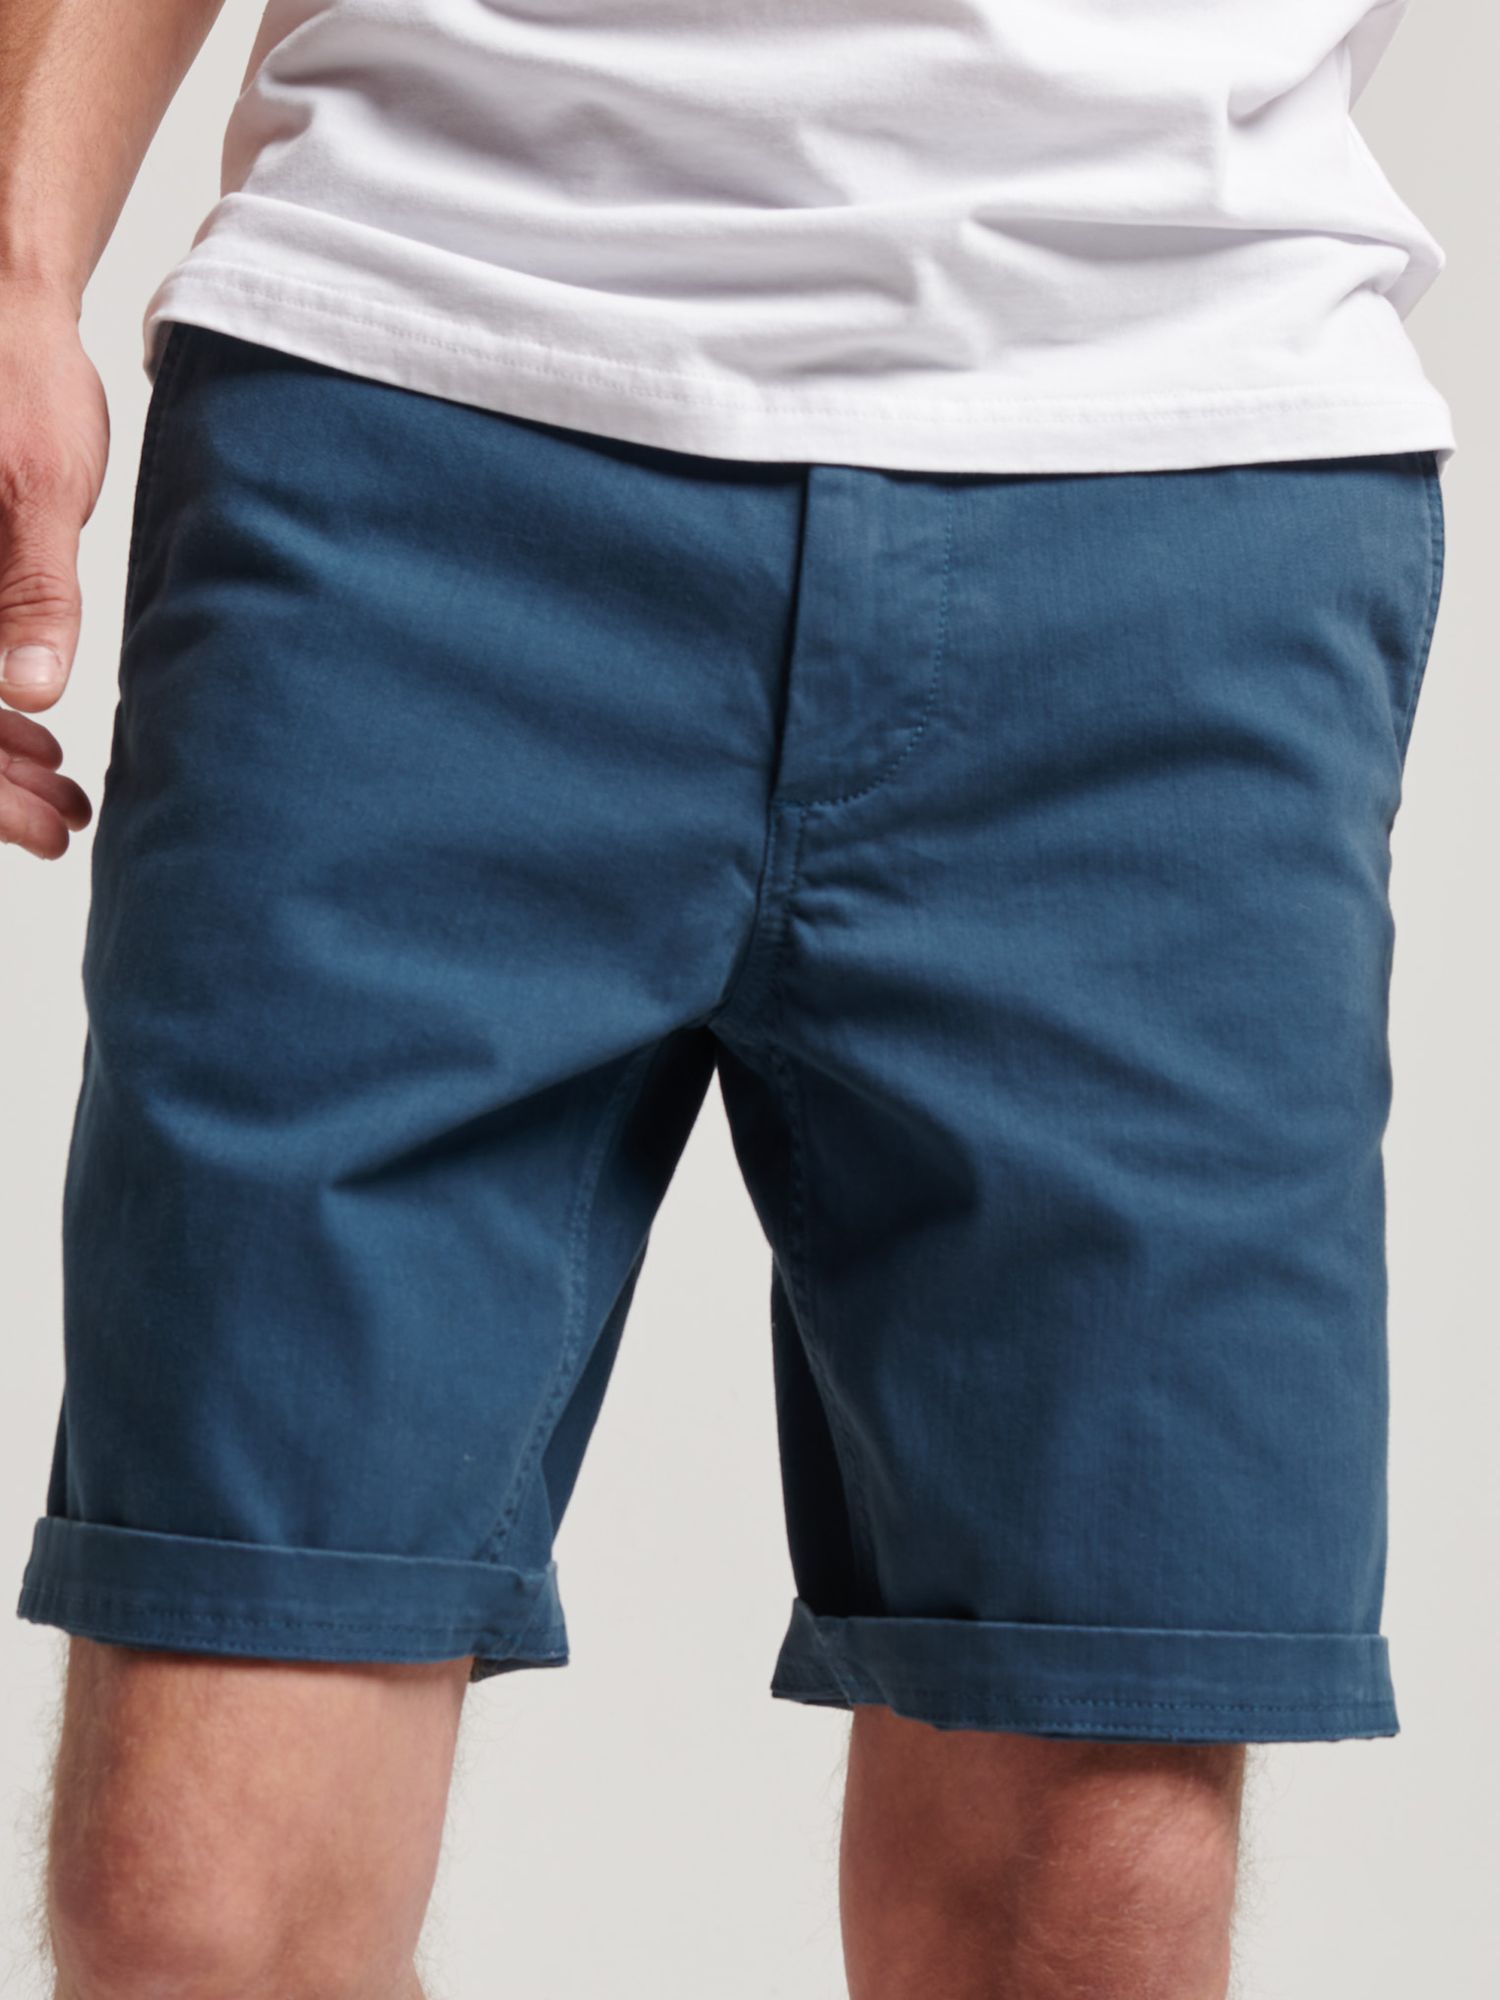 Superdry Officer Chino Shorts, Blue Bottle, 28R